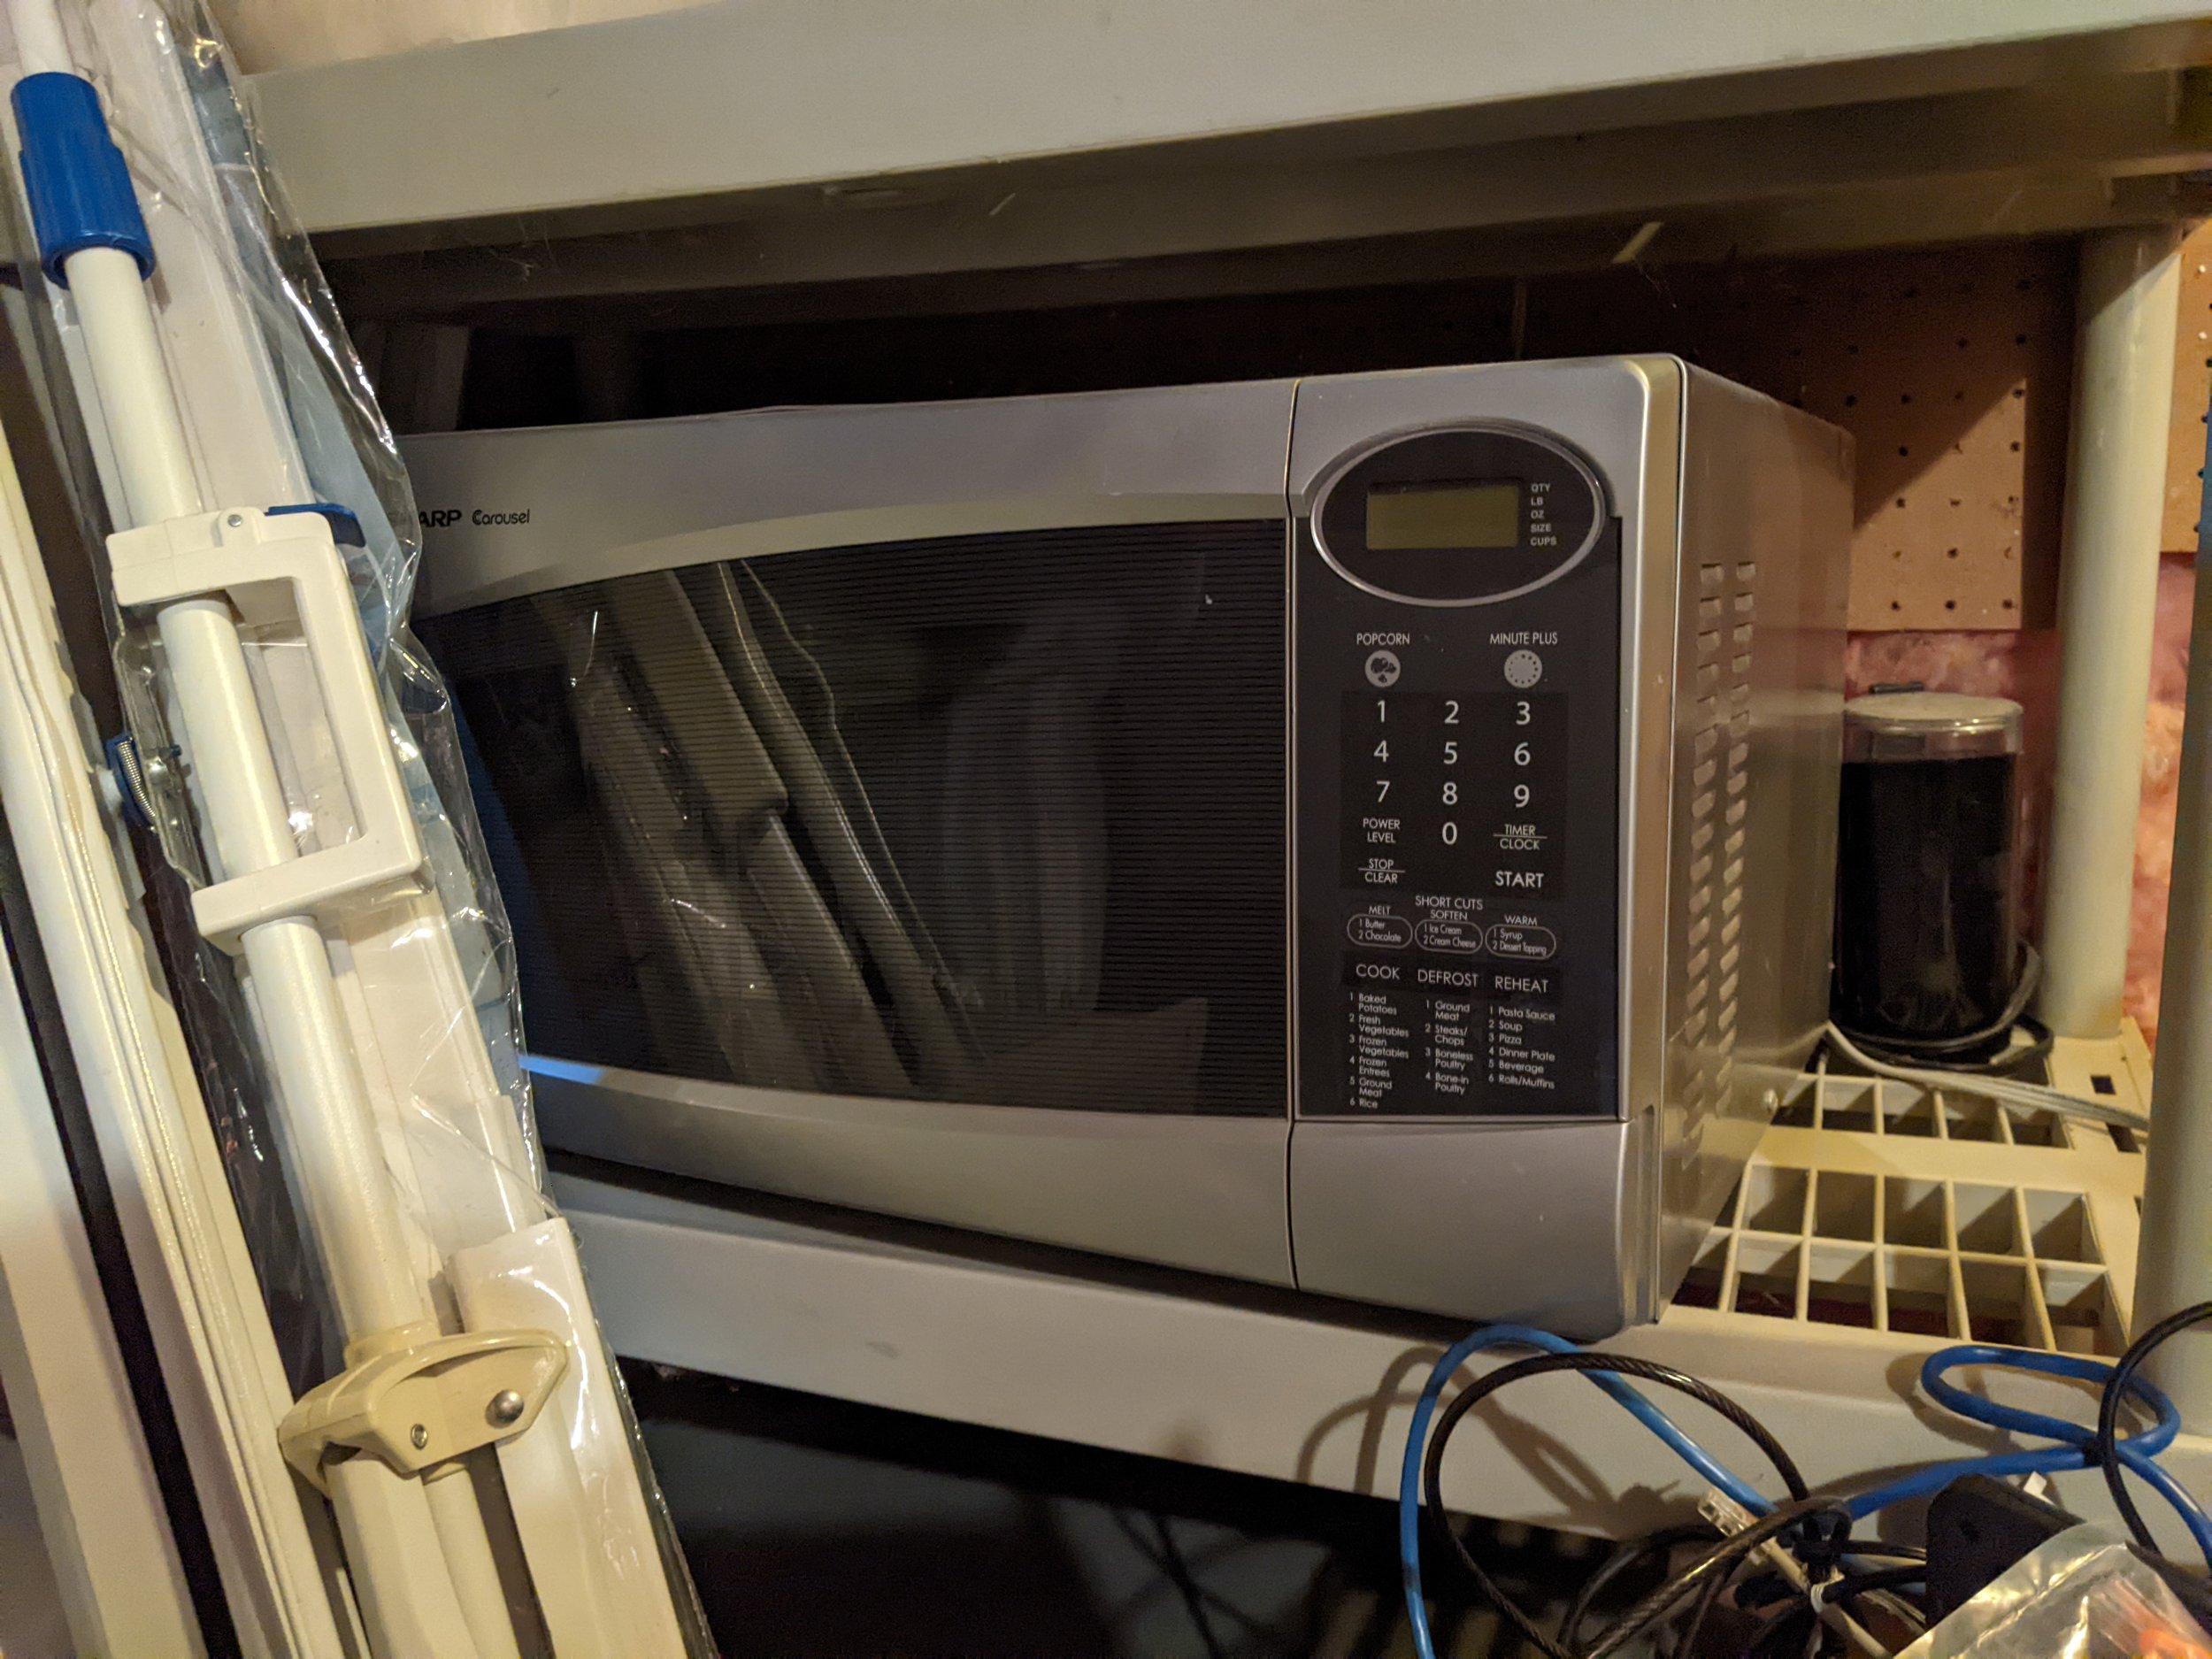 This old microwave simply wants to go to the donation center